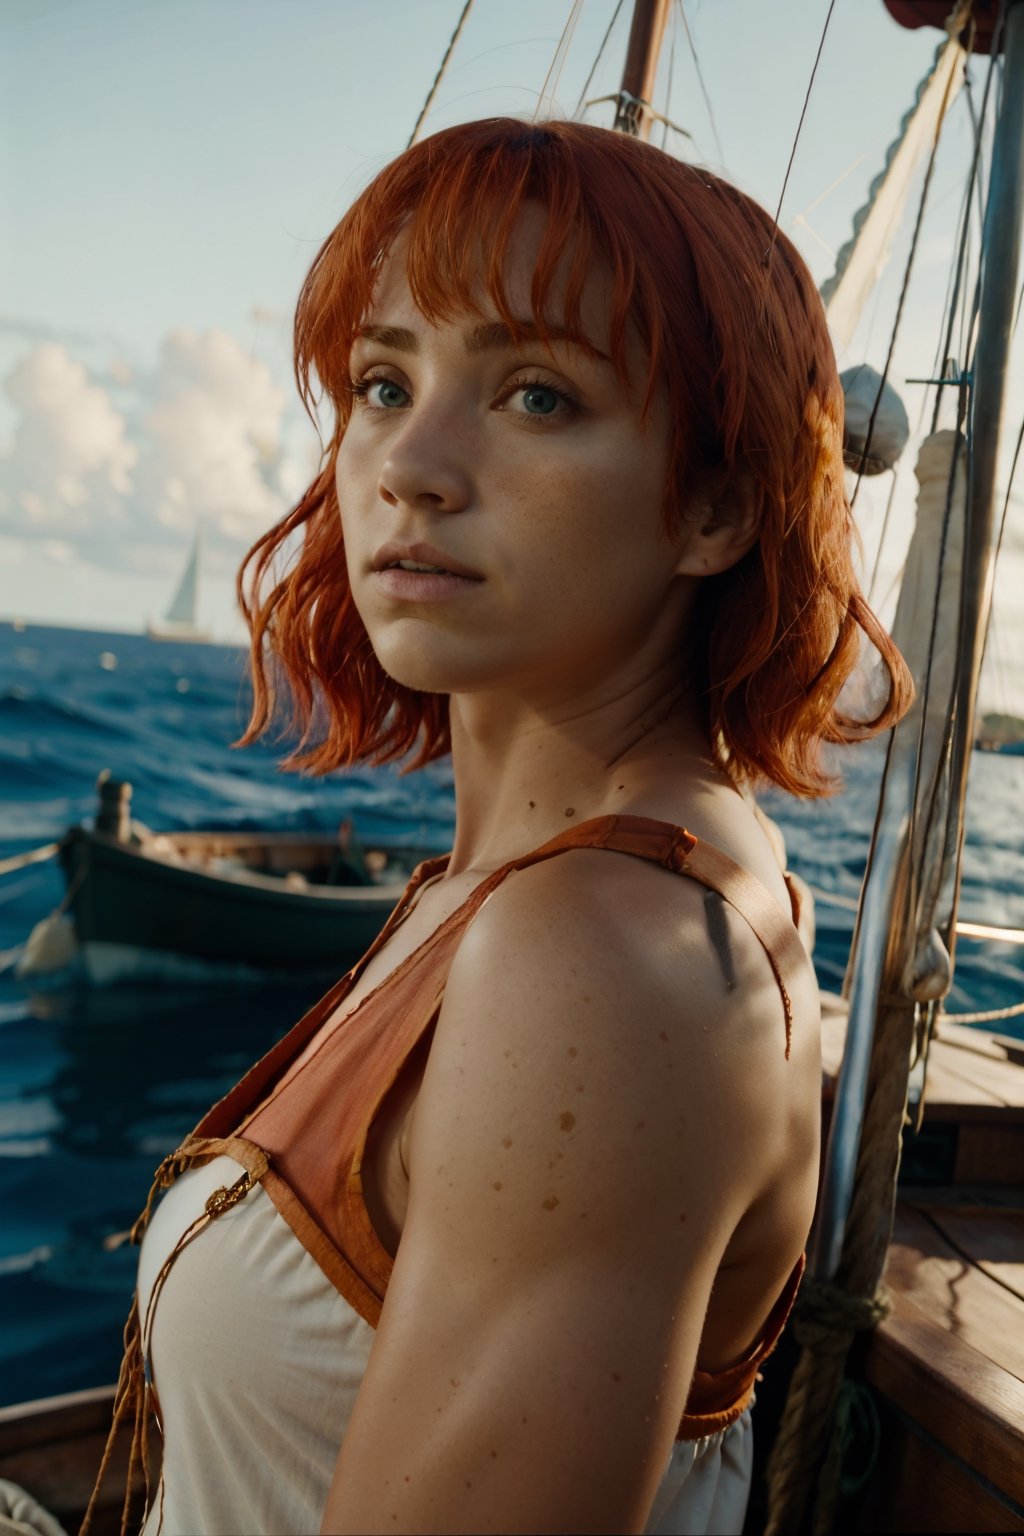 emilyrudd, nami, a woman with red hair on a wooden boat 
, a woman with red hair